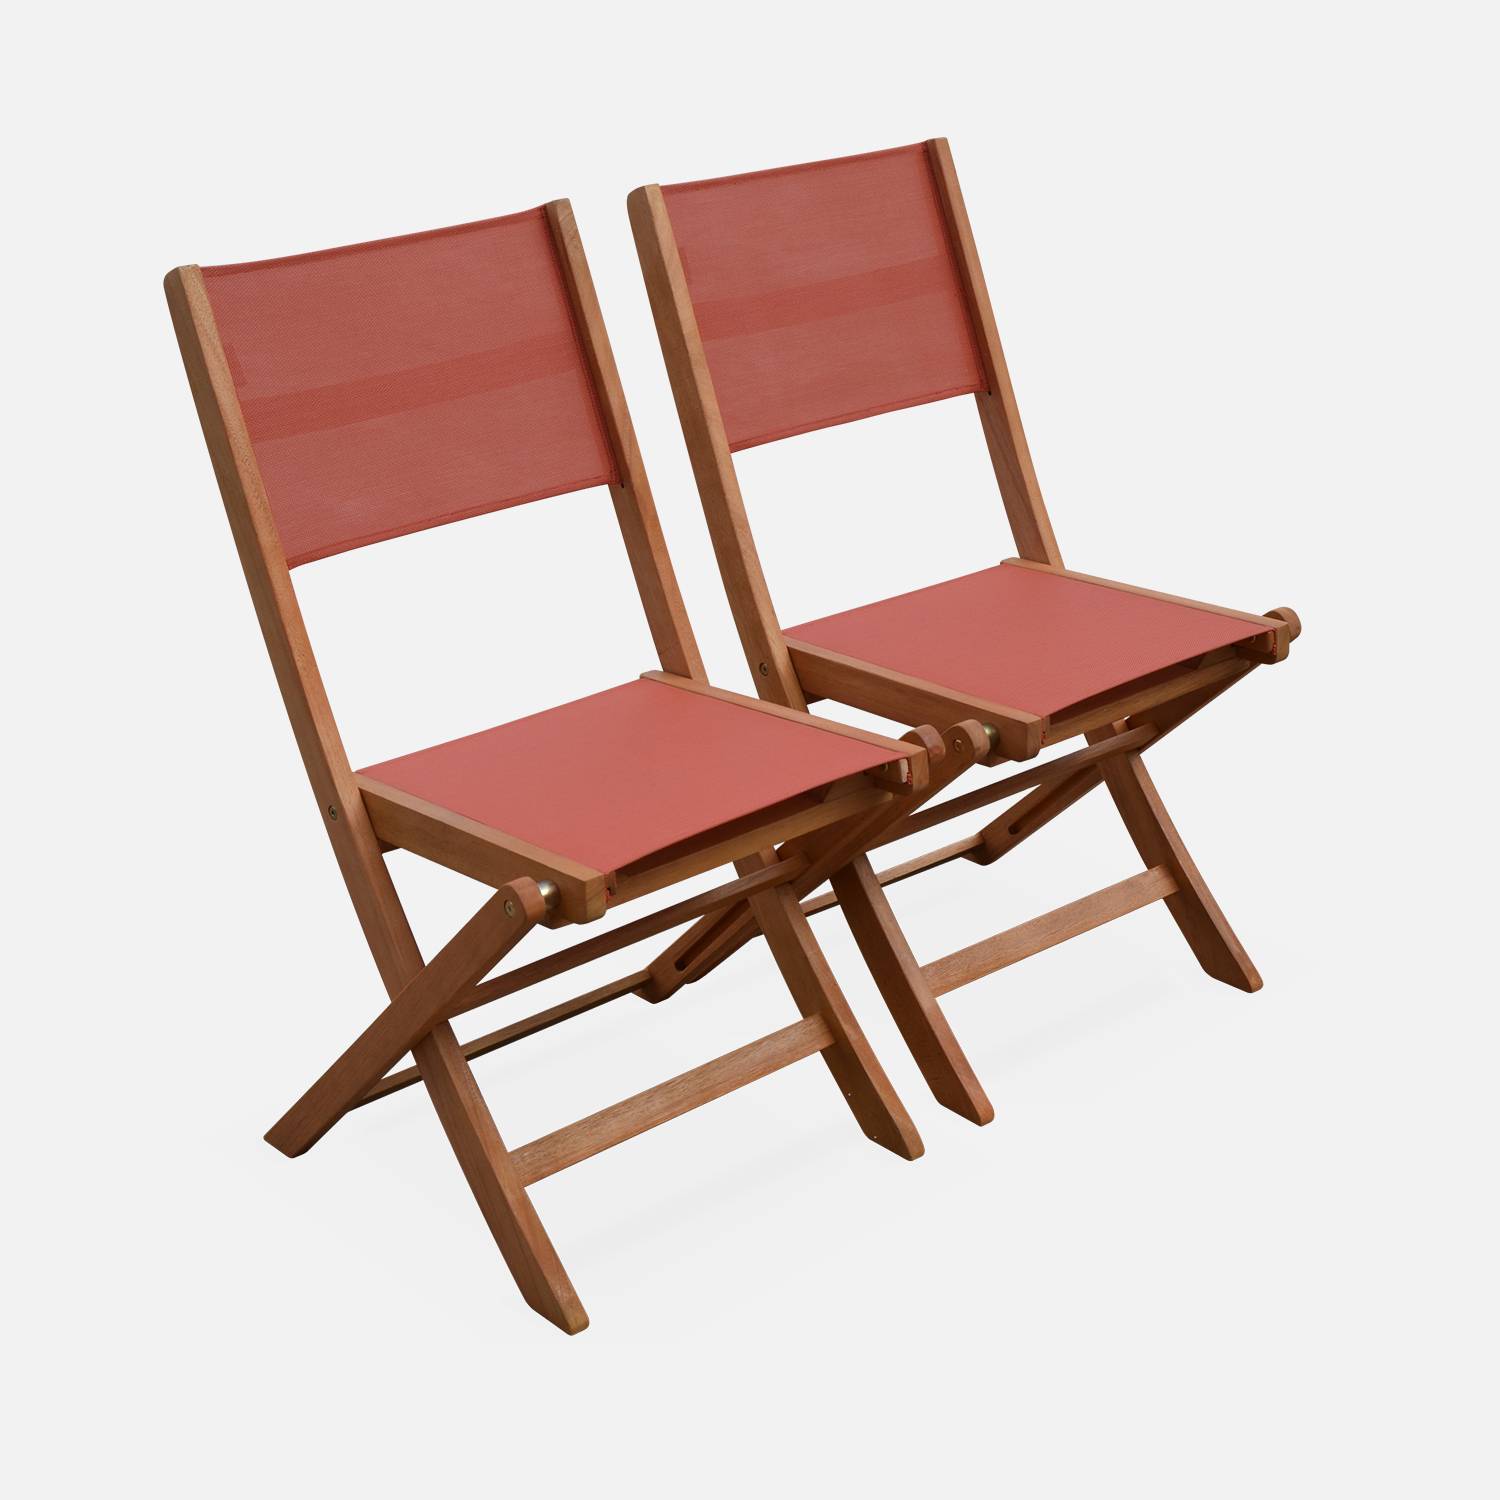 Set of 2 garden chairs in wood,  oiled FSC eucalyptus and textilene folding chairs - Almeria -  Terracotta Photo3